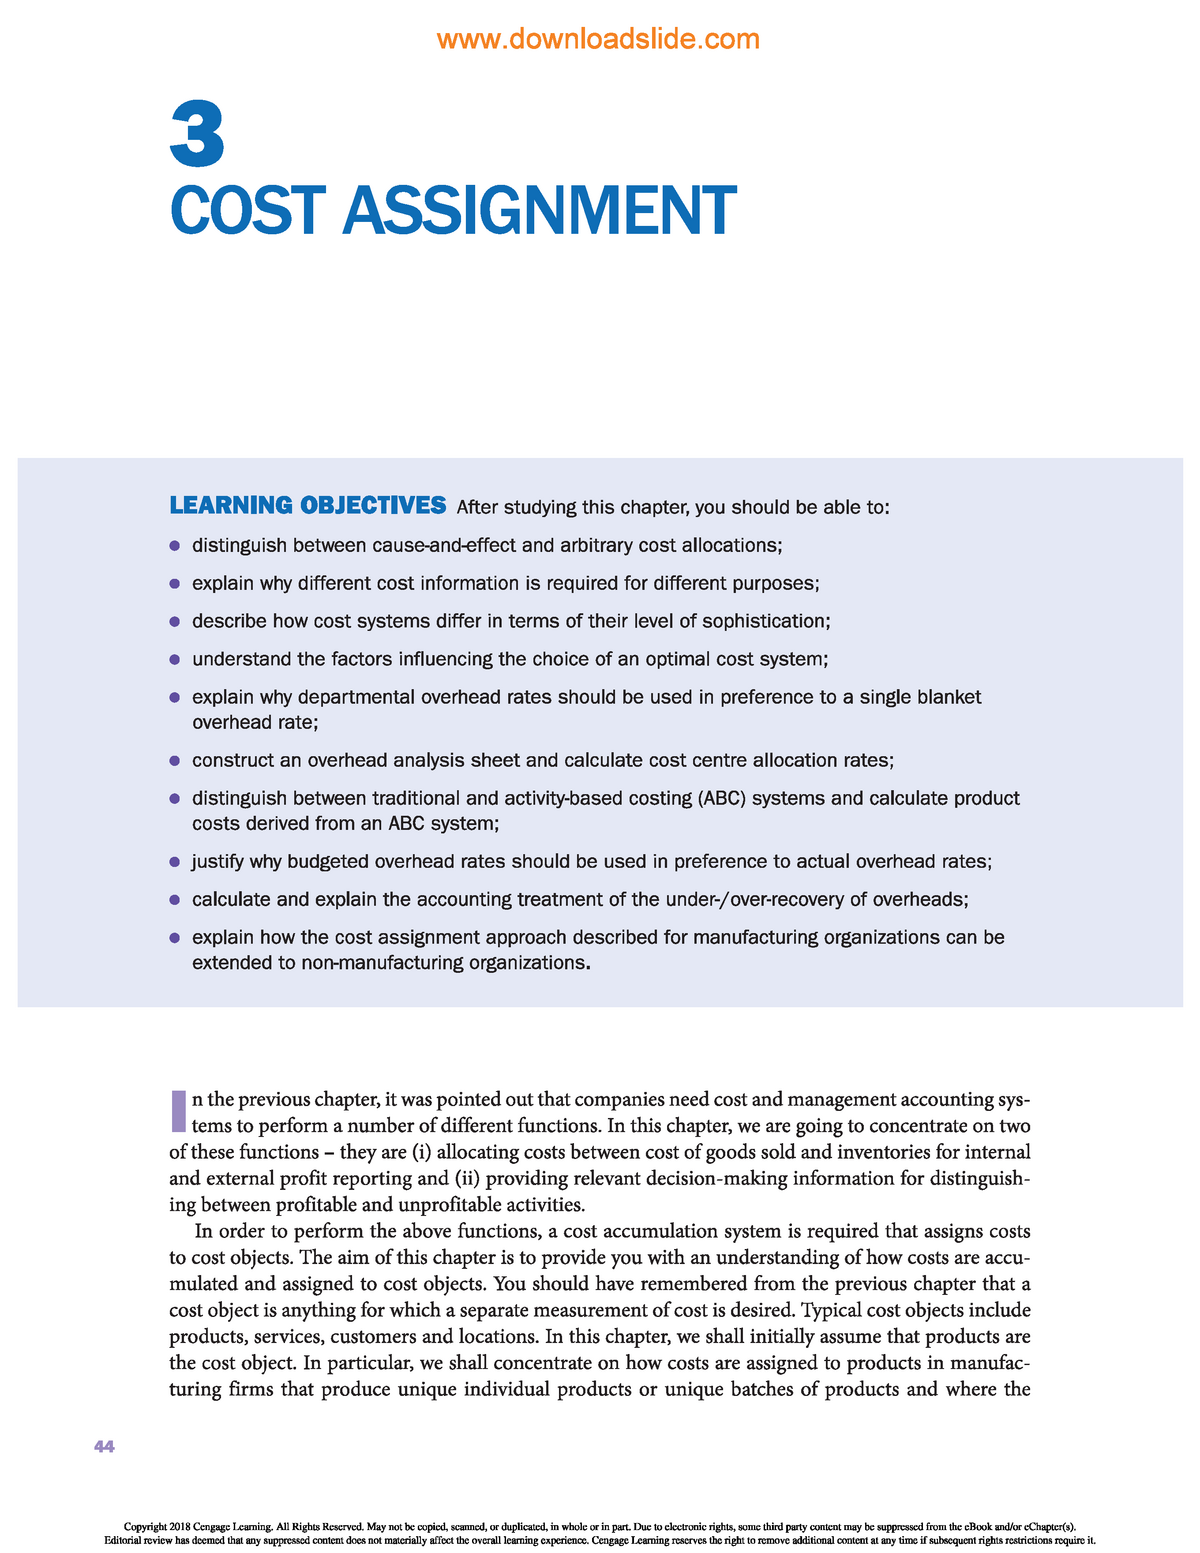 purpose of cost assignment